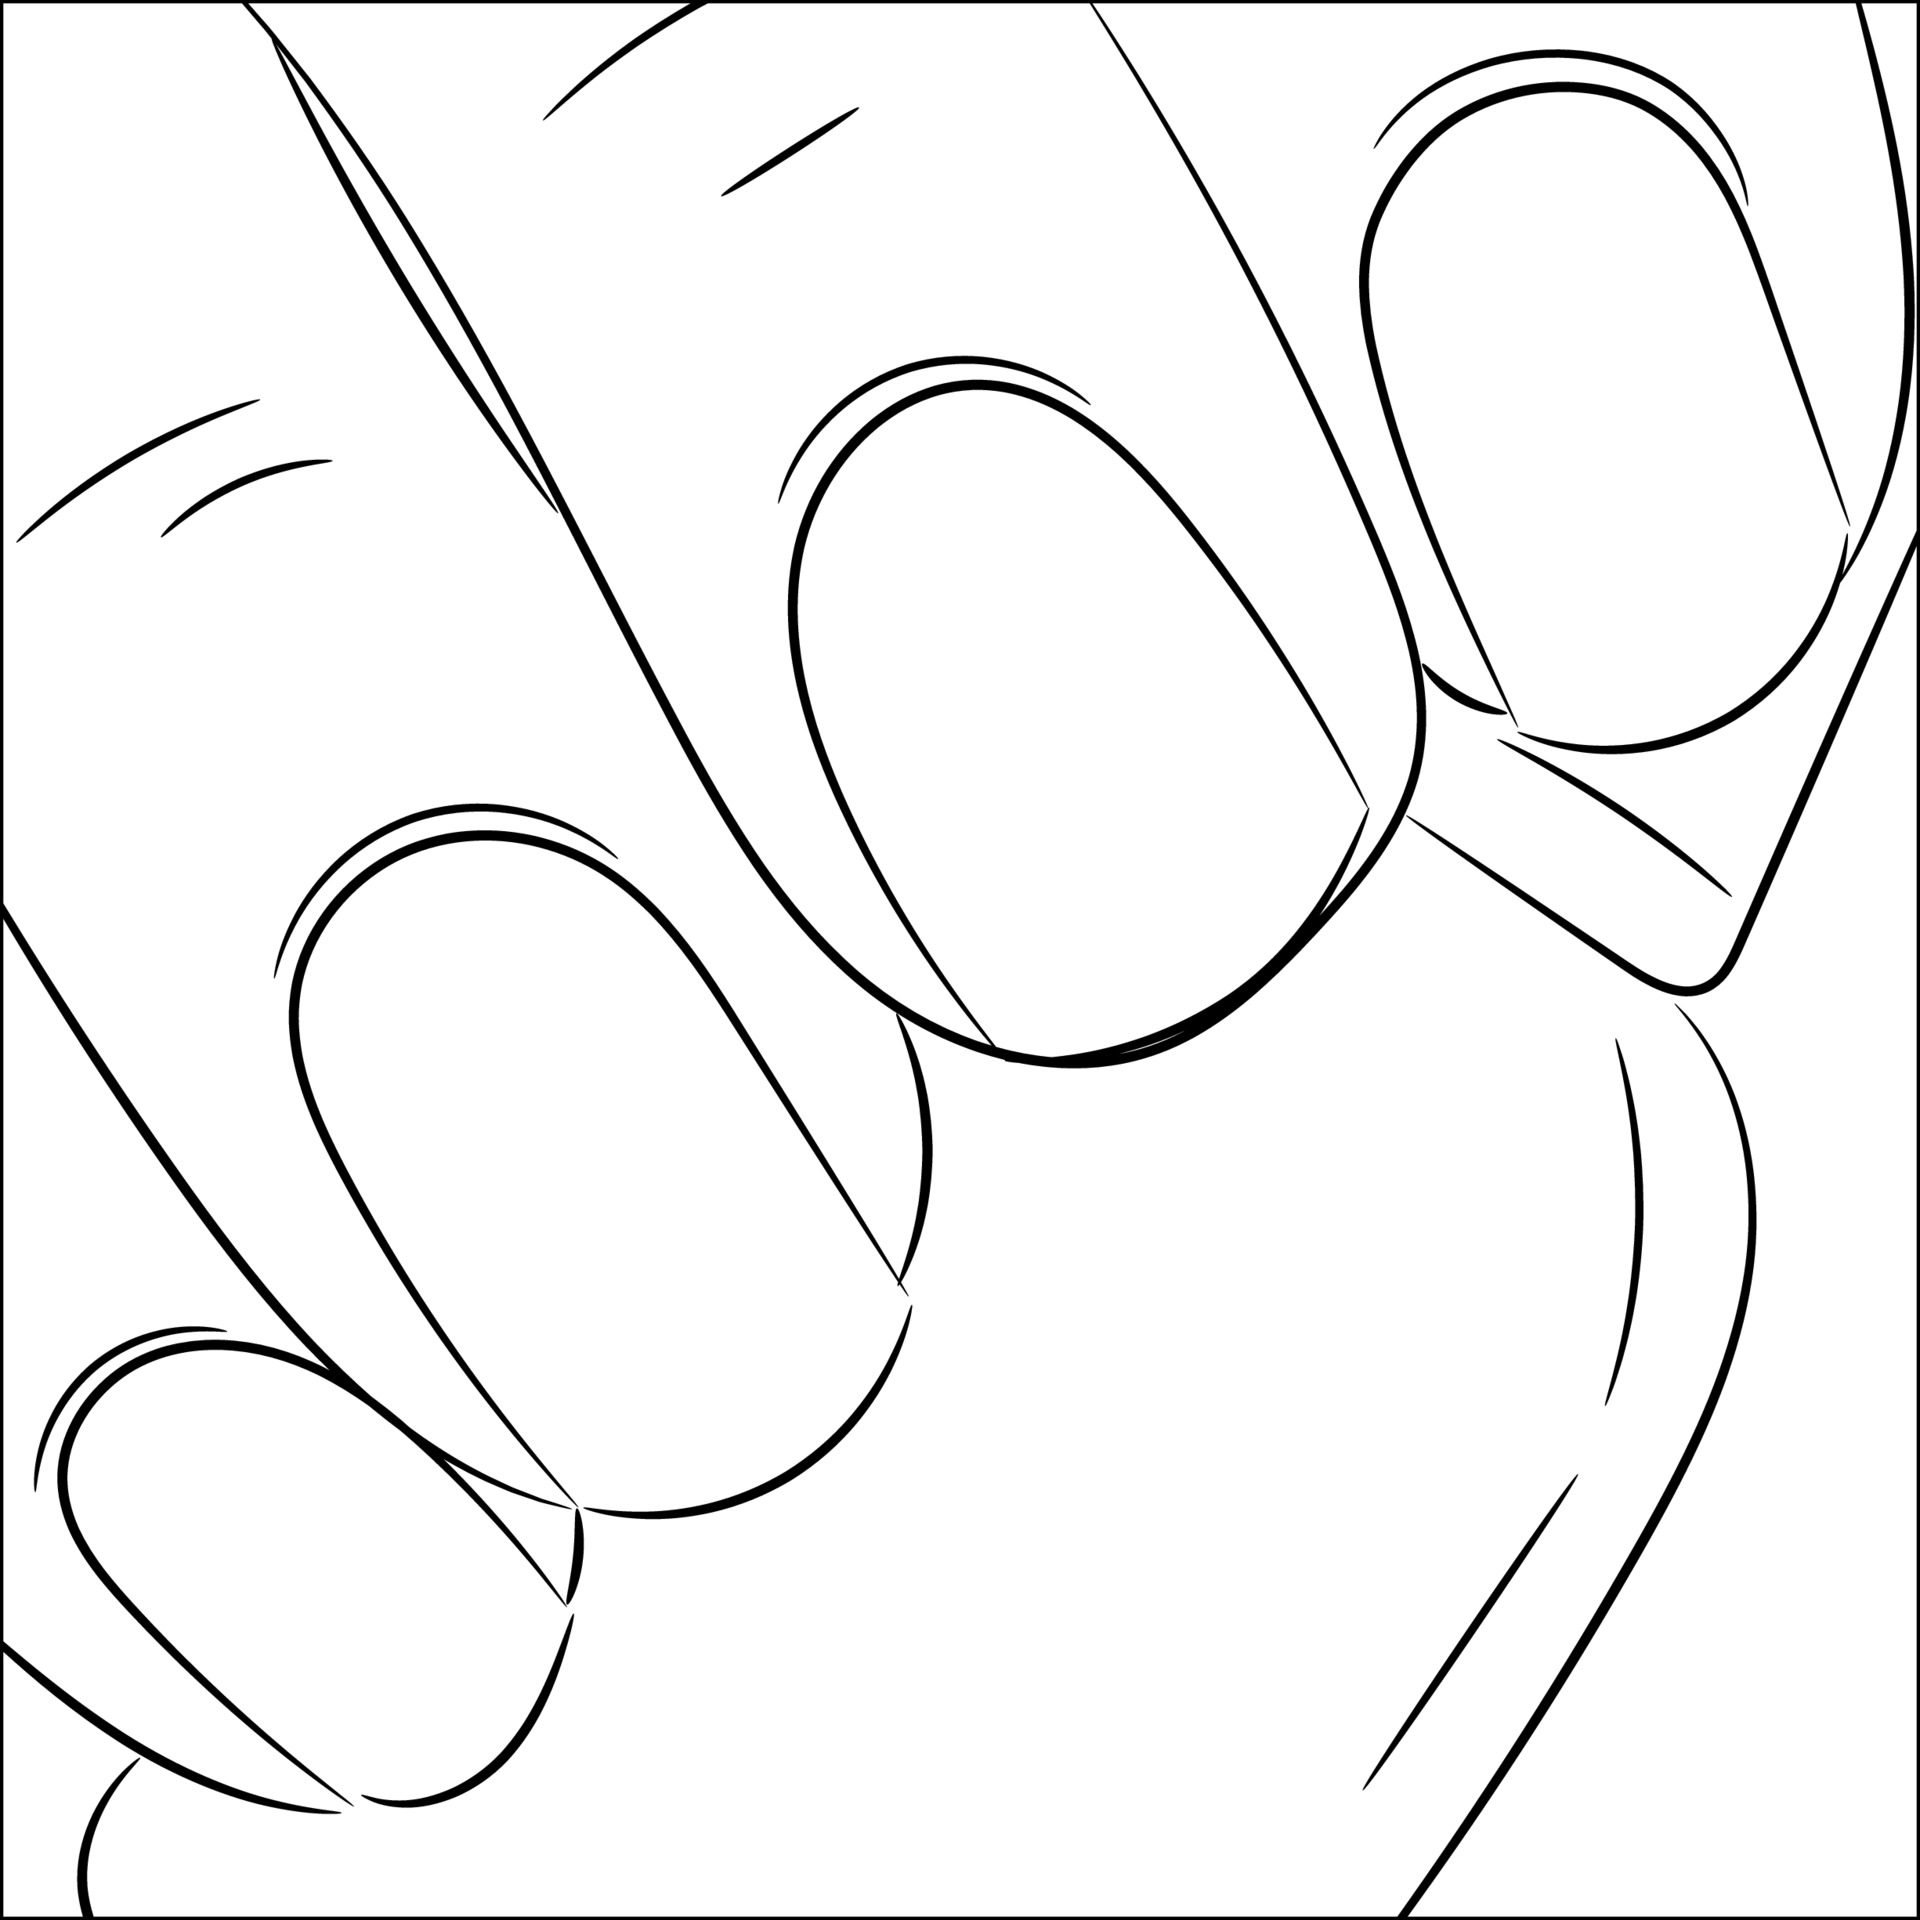 Closeup view of nail color swatch. Neat manicure vector illustration ...